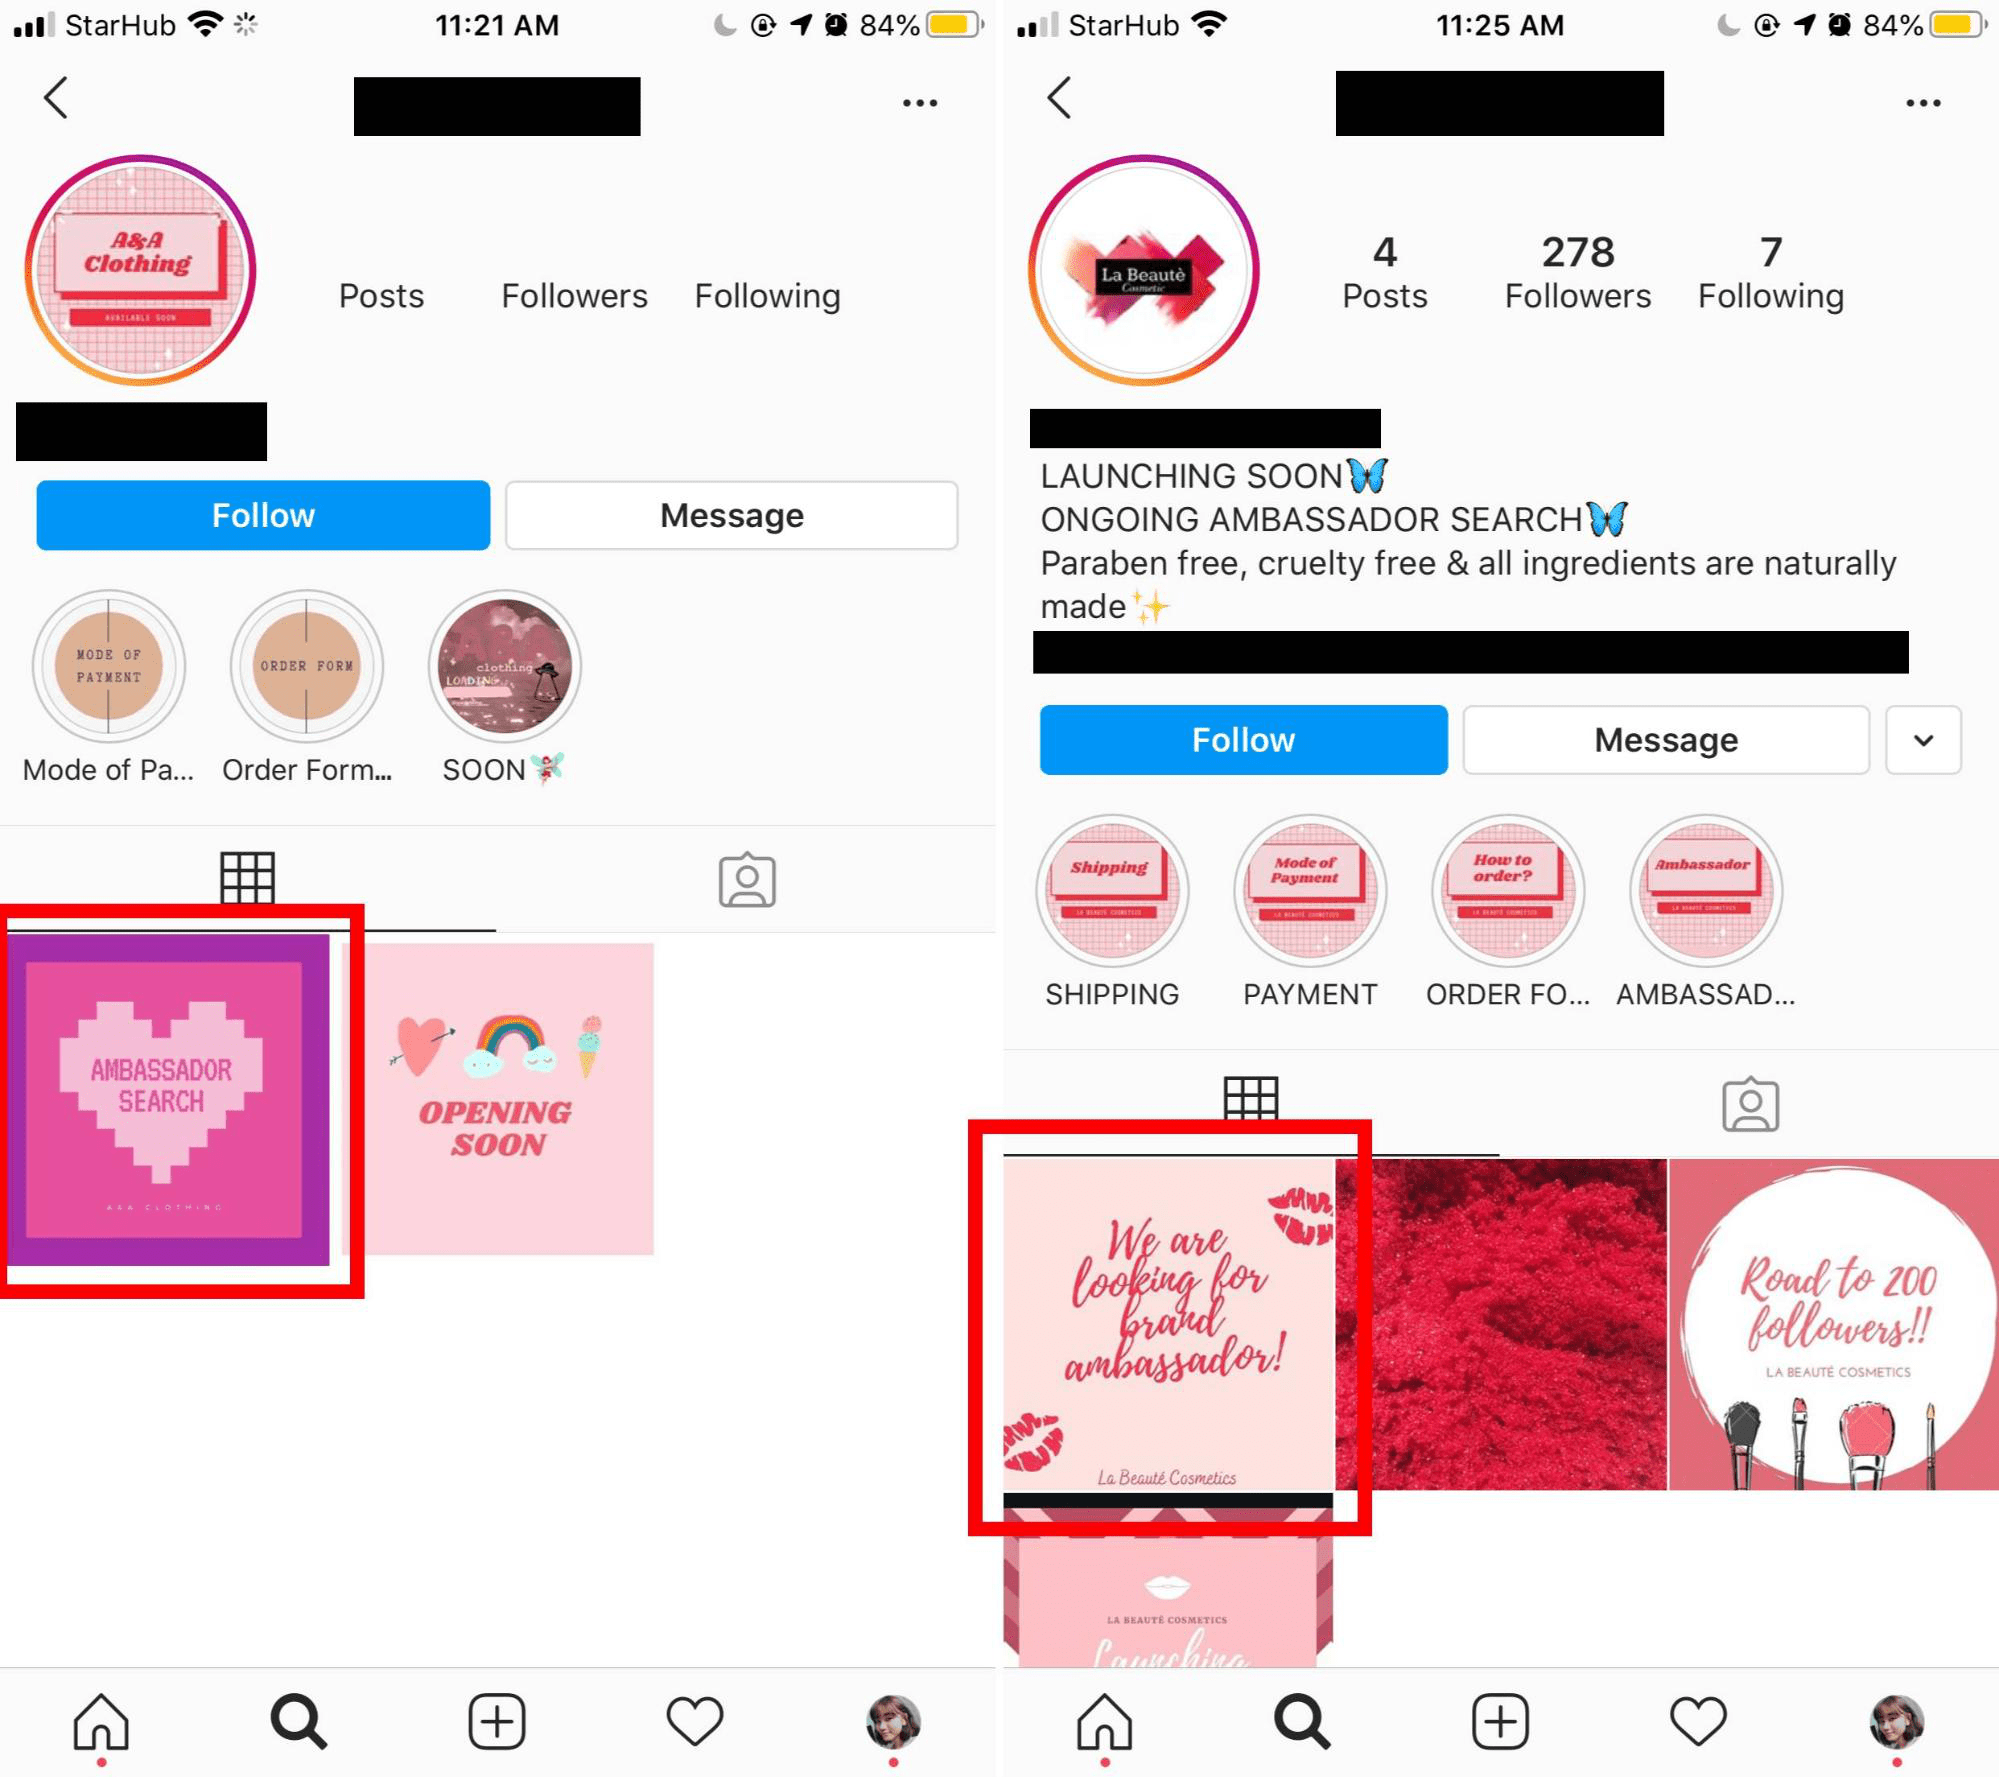 ongoing scams in singapore - fake instagram ambassador